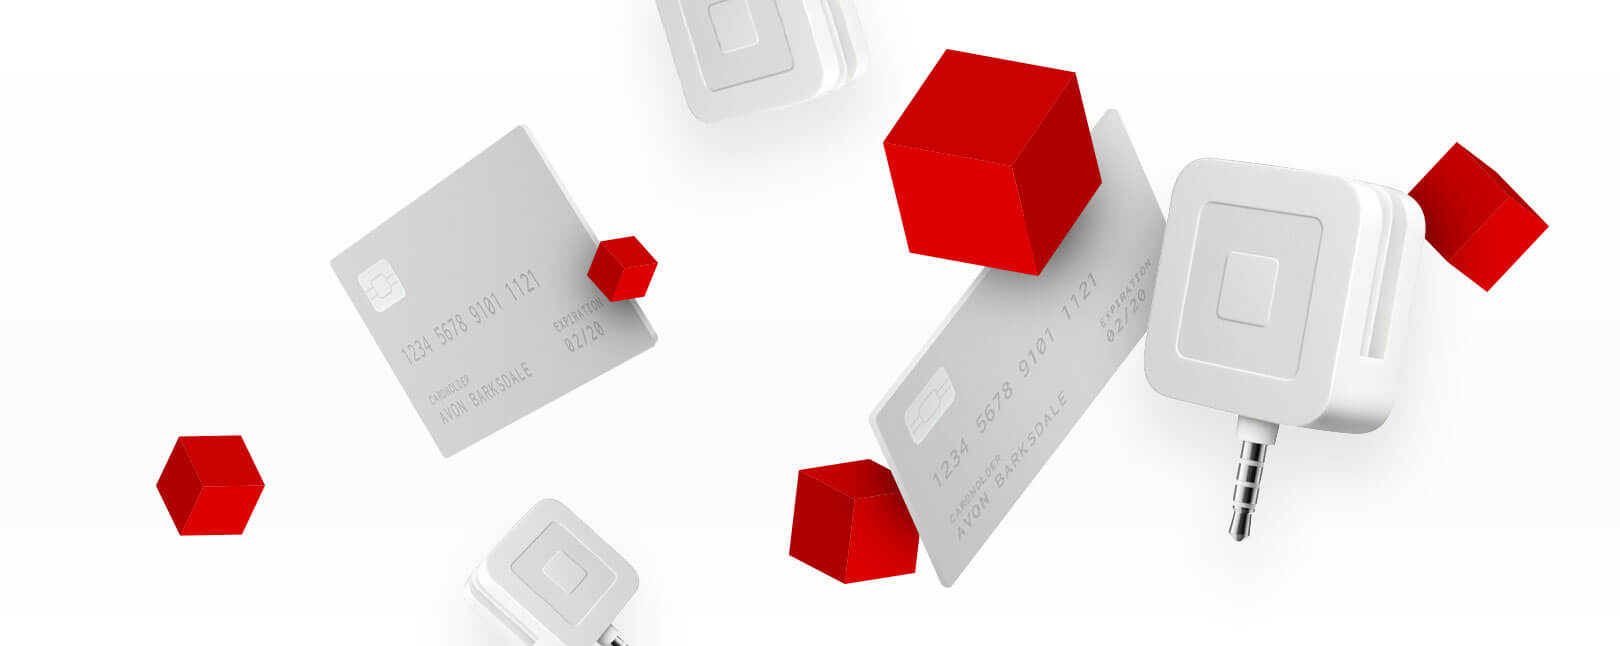 Square Chargeback Rules